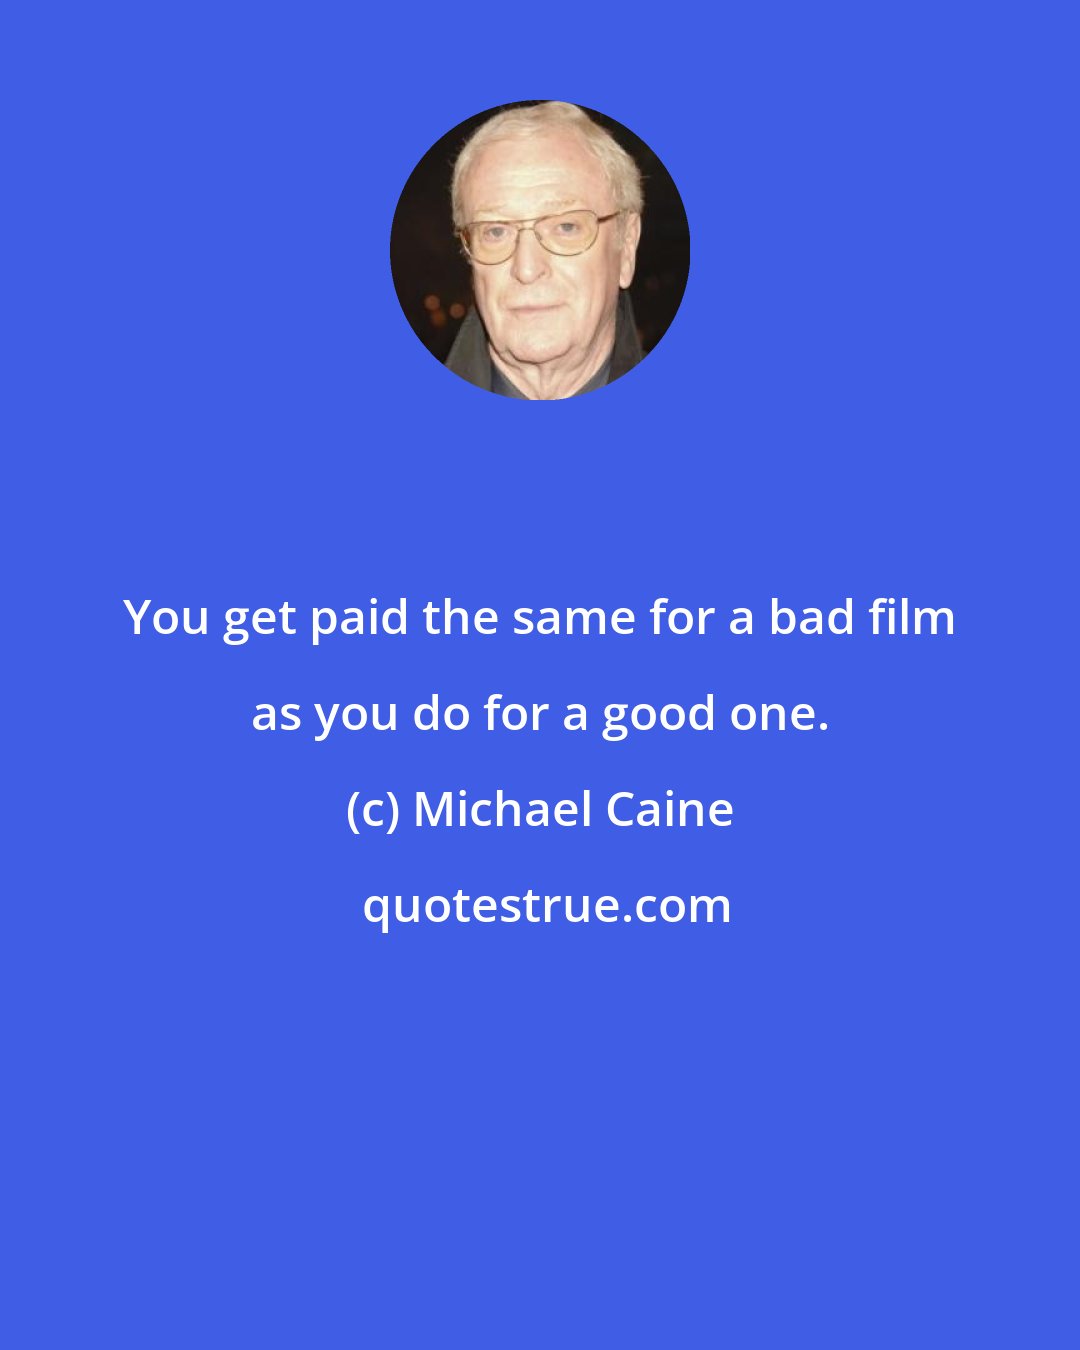 Michael Caine: You get paid the same for a bad film as you do for a good one.